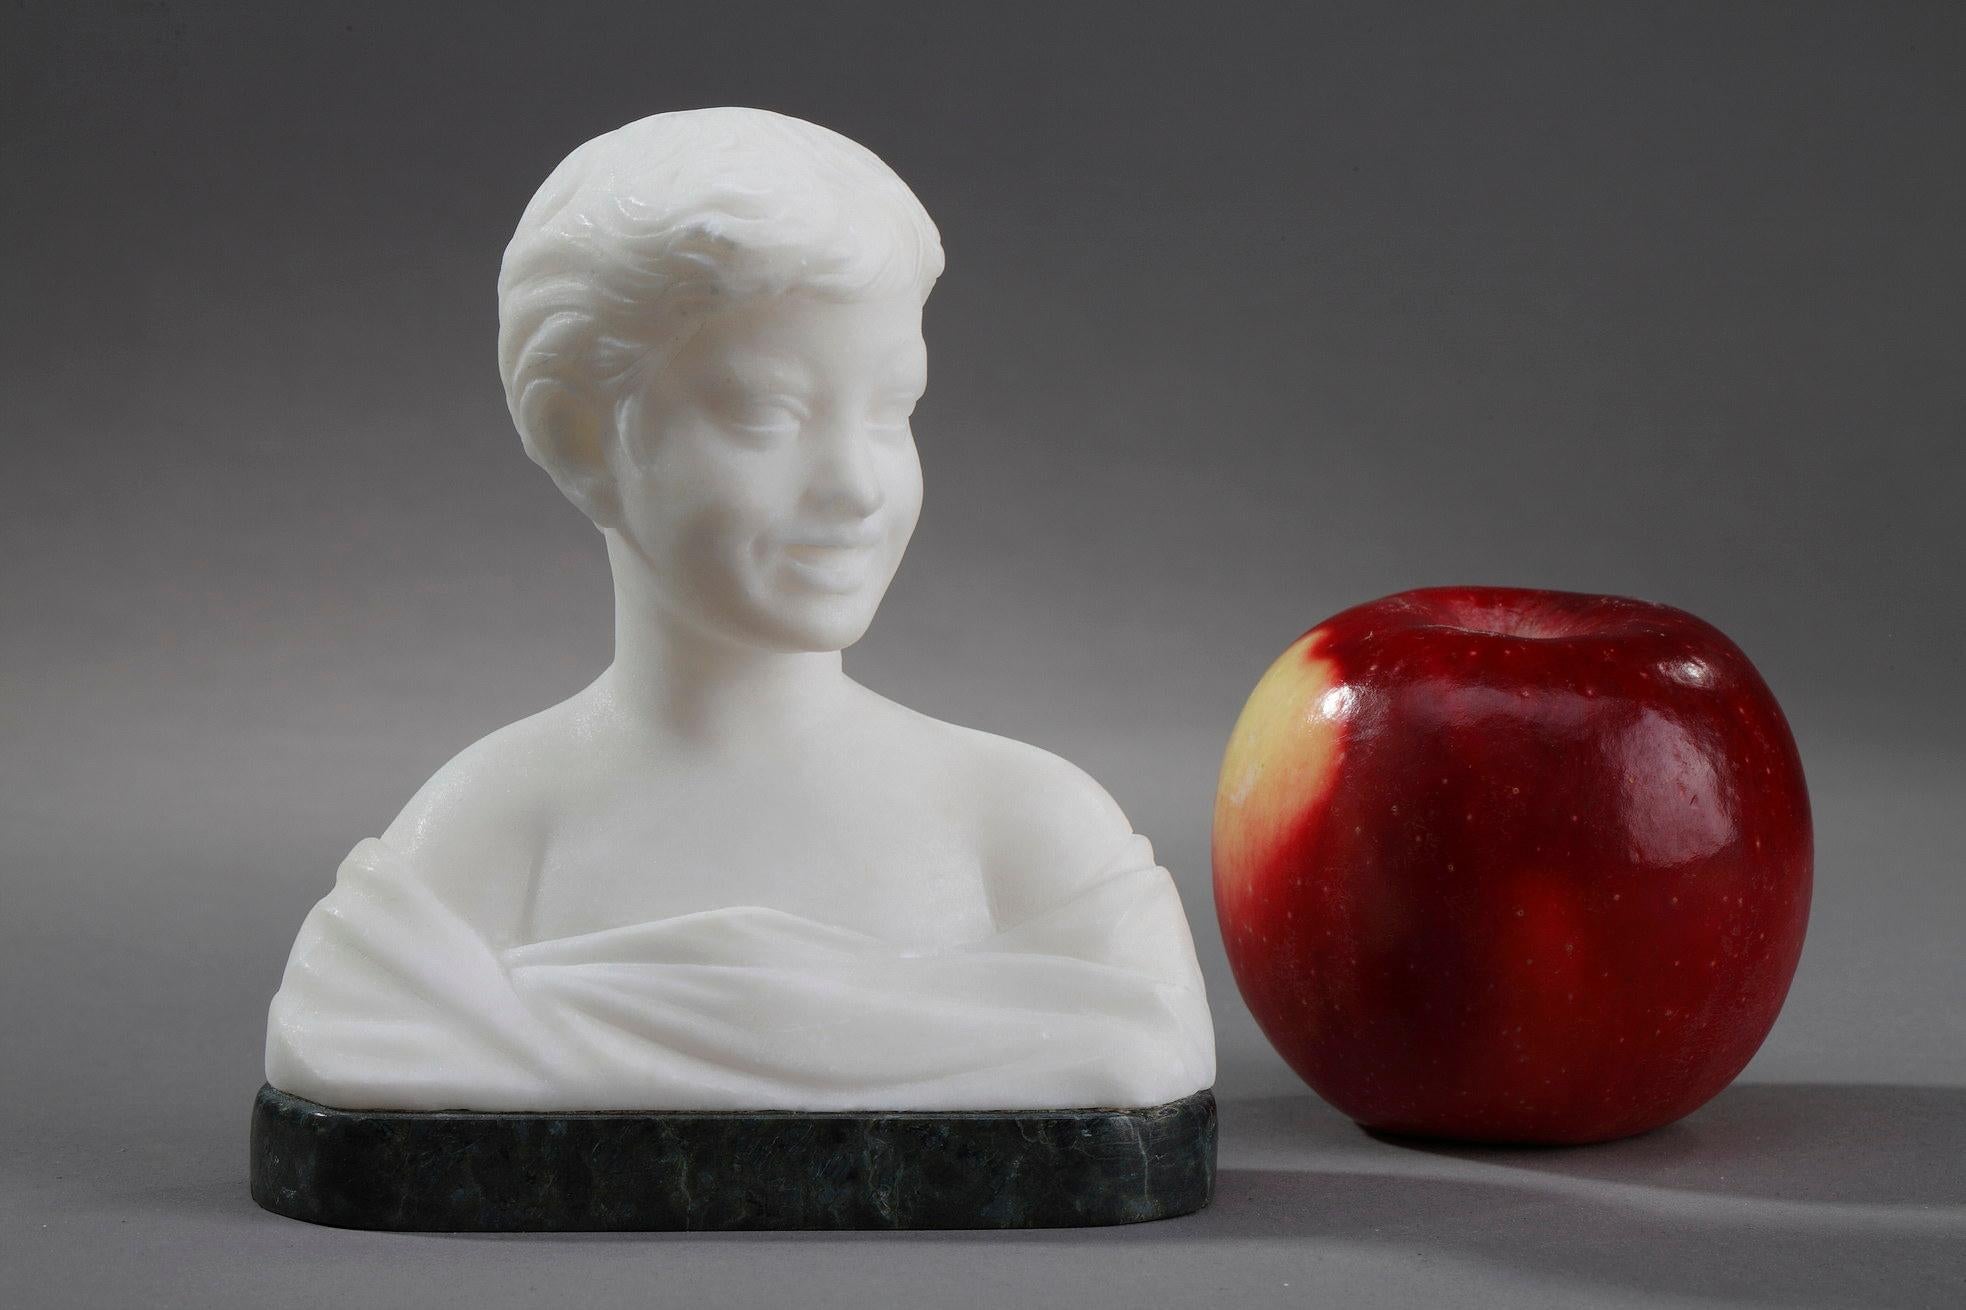 Small alabaster bust representing a young boy wearing a drape. This very lively statuette shows him talking while turning to the left. This fine sculpture individualizes the child's hair strands. The whole rests on an oval base in green marble.